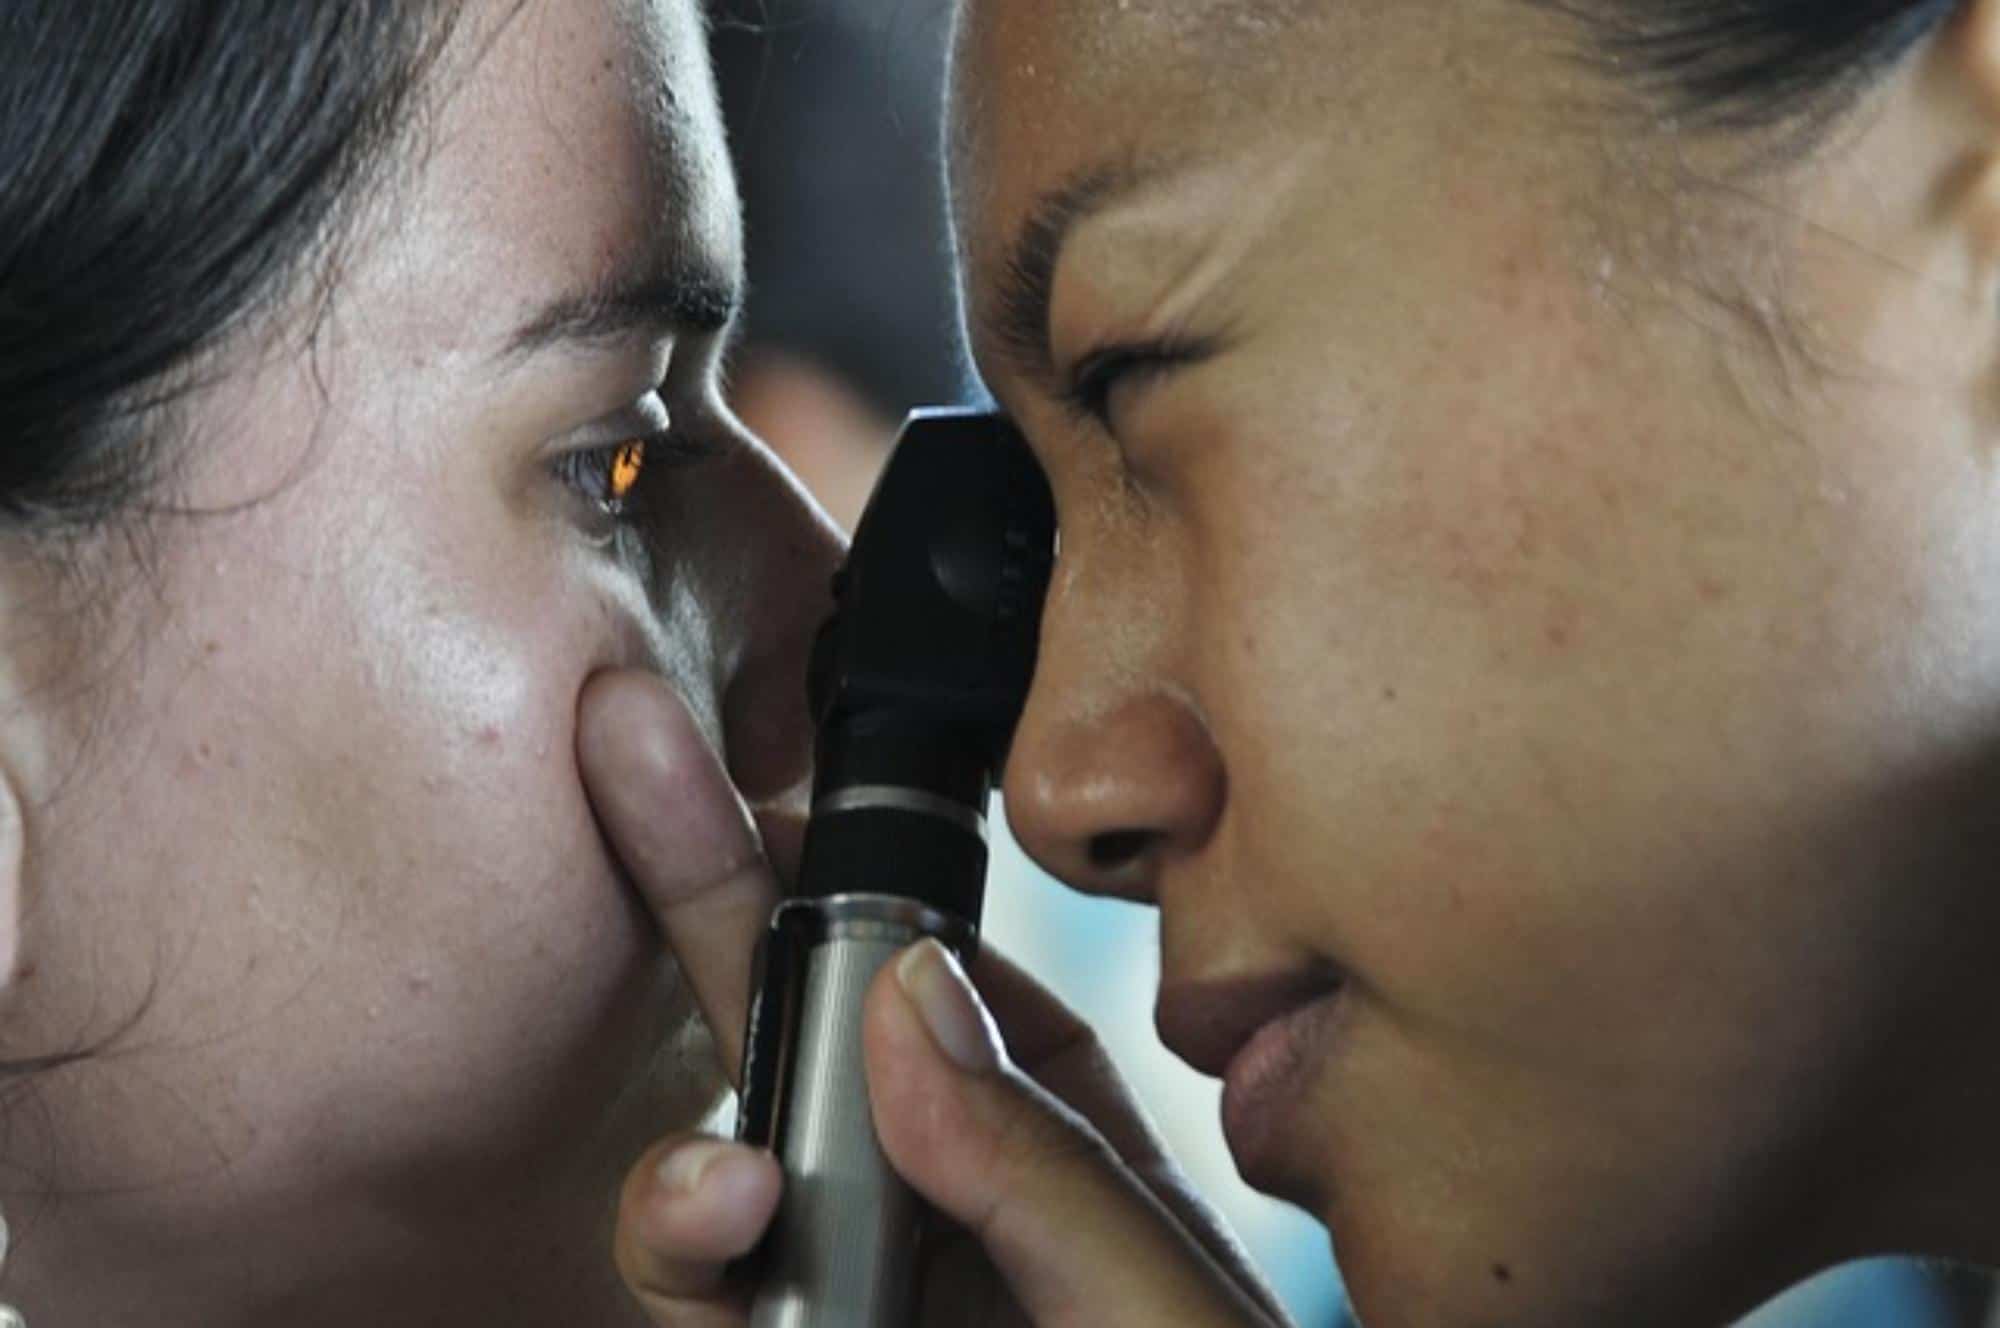 An eye exam can detect glaucoma in the early stages